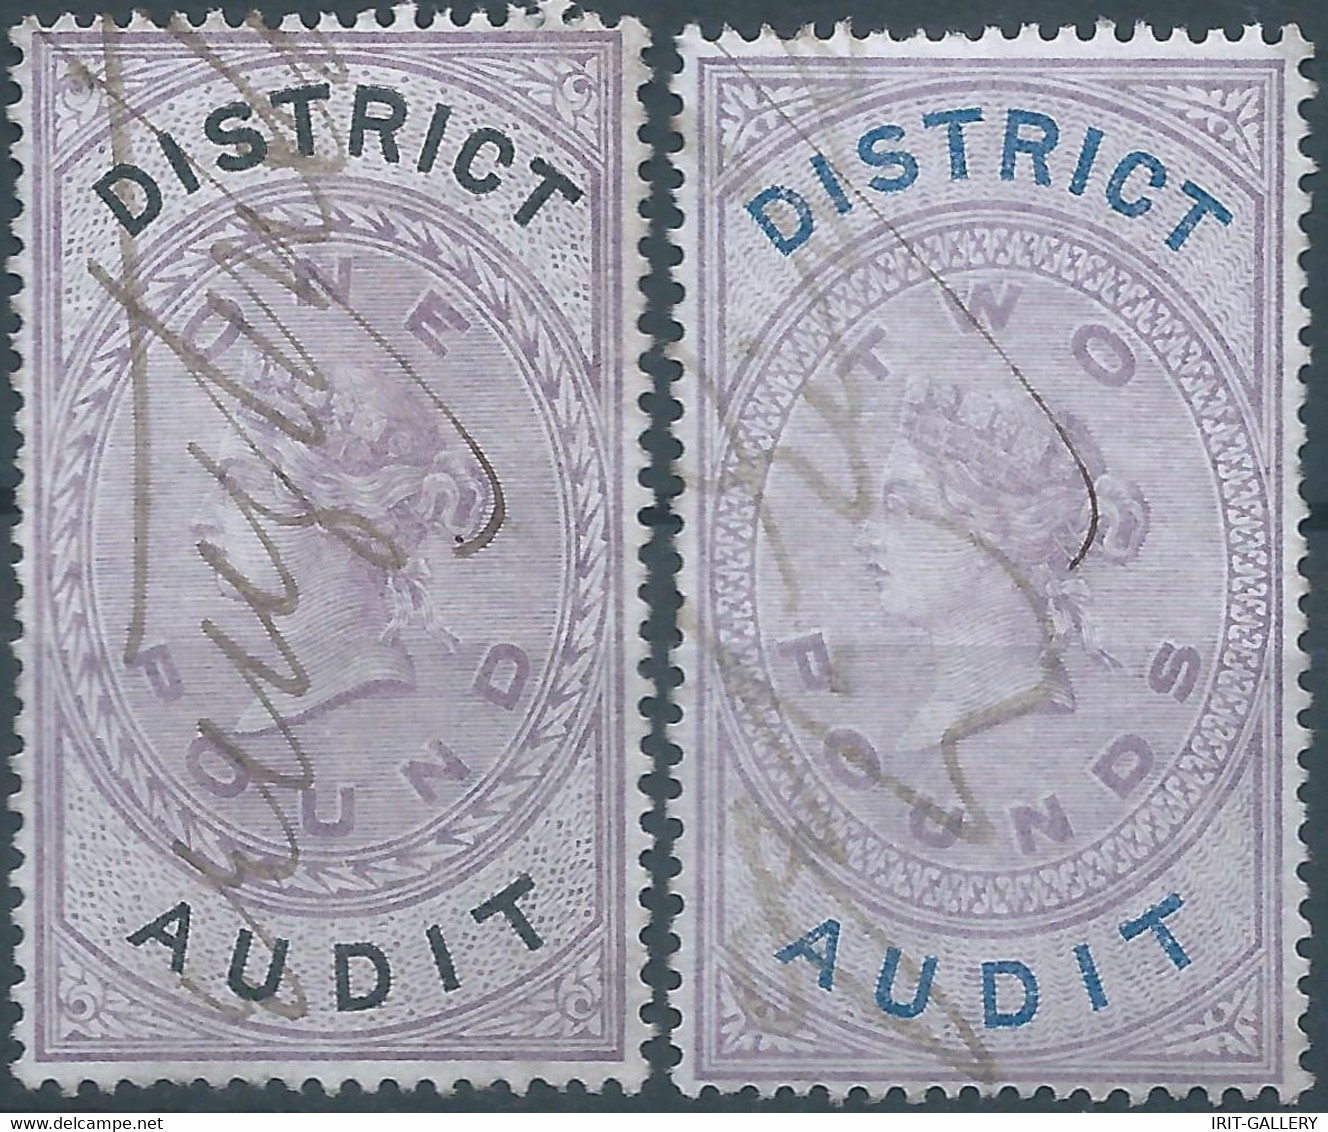 Great Britain-ENGLAND,Queen Victoria,1880-1900 Revenue Stamp Tax Fisca DISTRICT AUDIT,1&2 Pounds,Used - Revenue Stamps